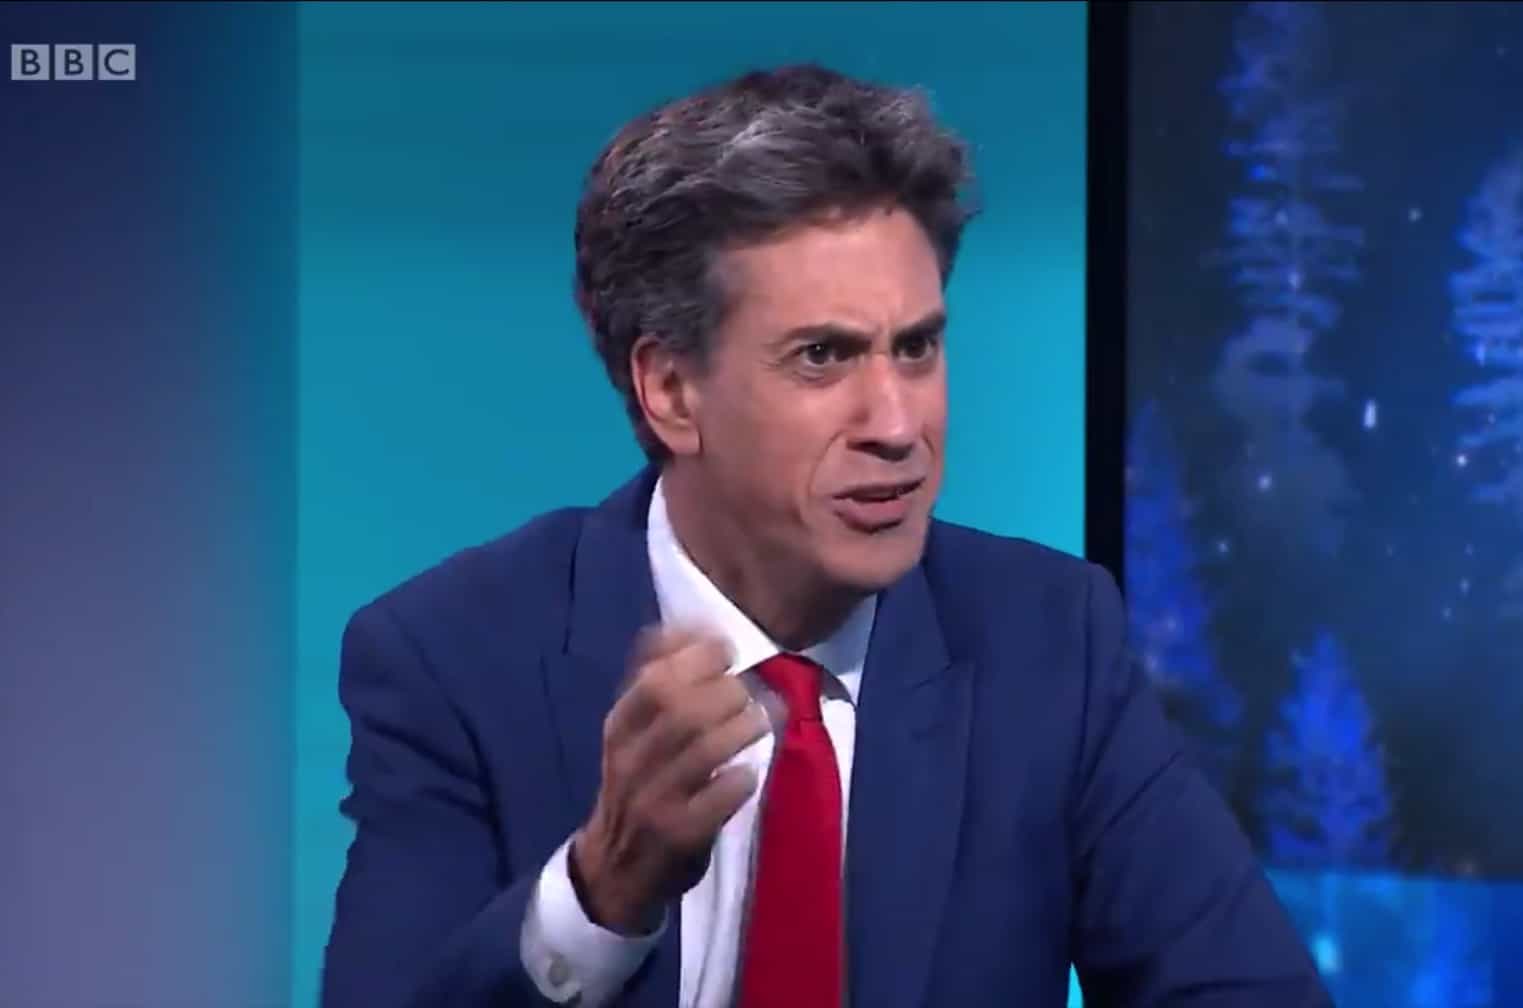 ‘Red bull on his Coco-pops’: Ed Miliband delivers blistering climate change speech